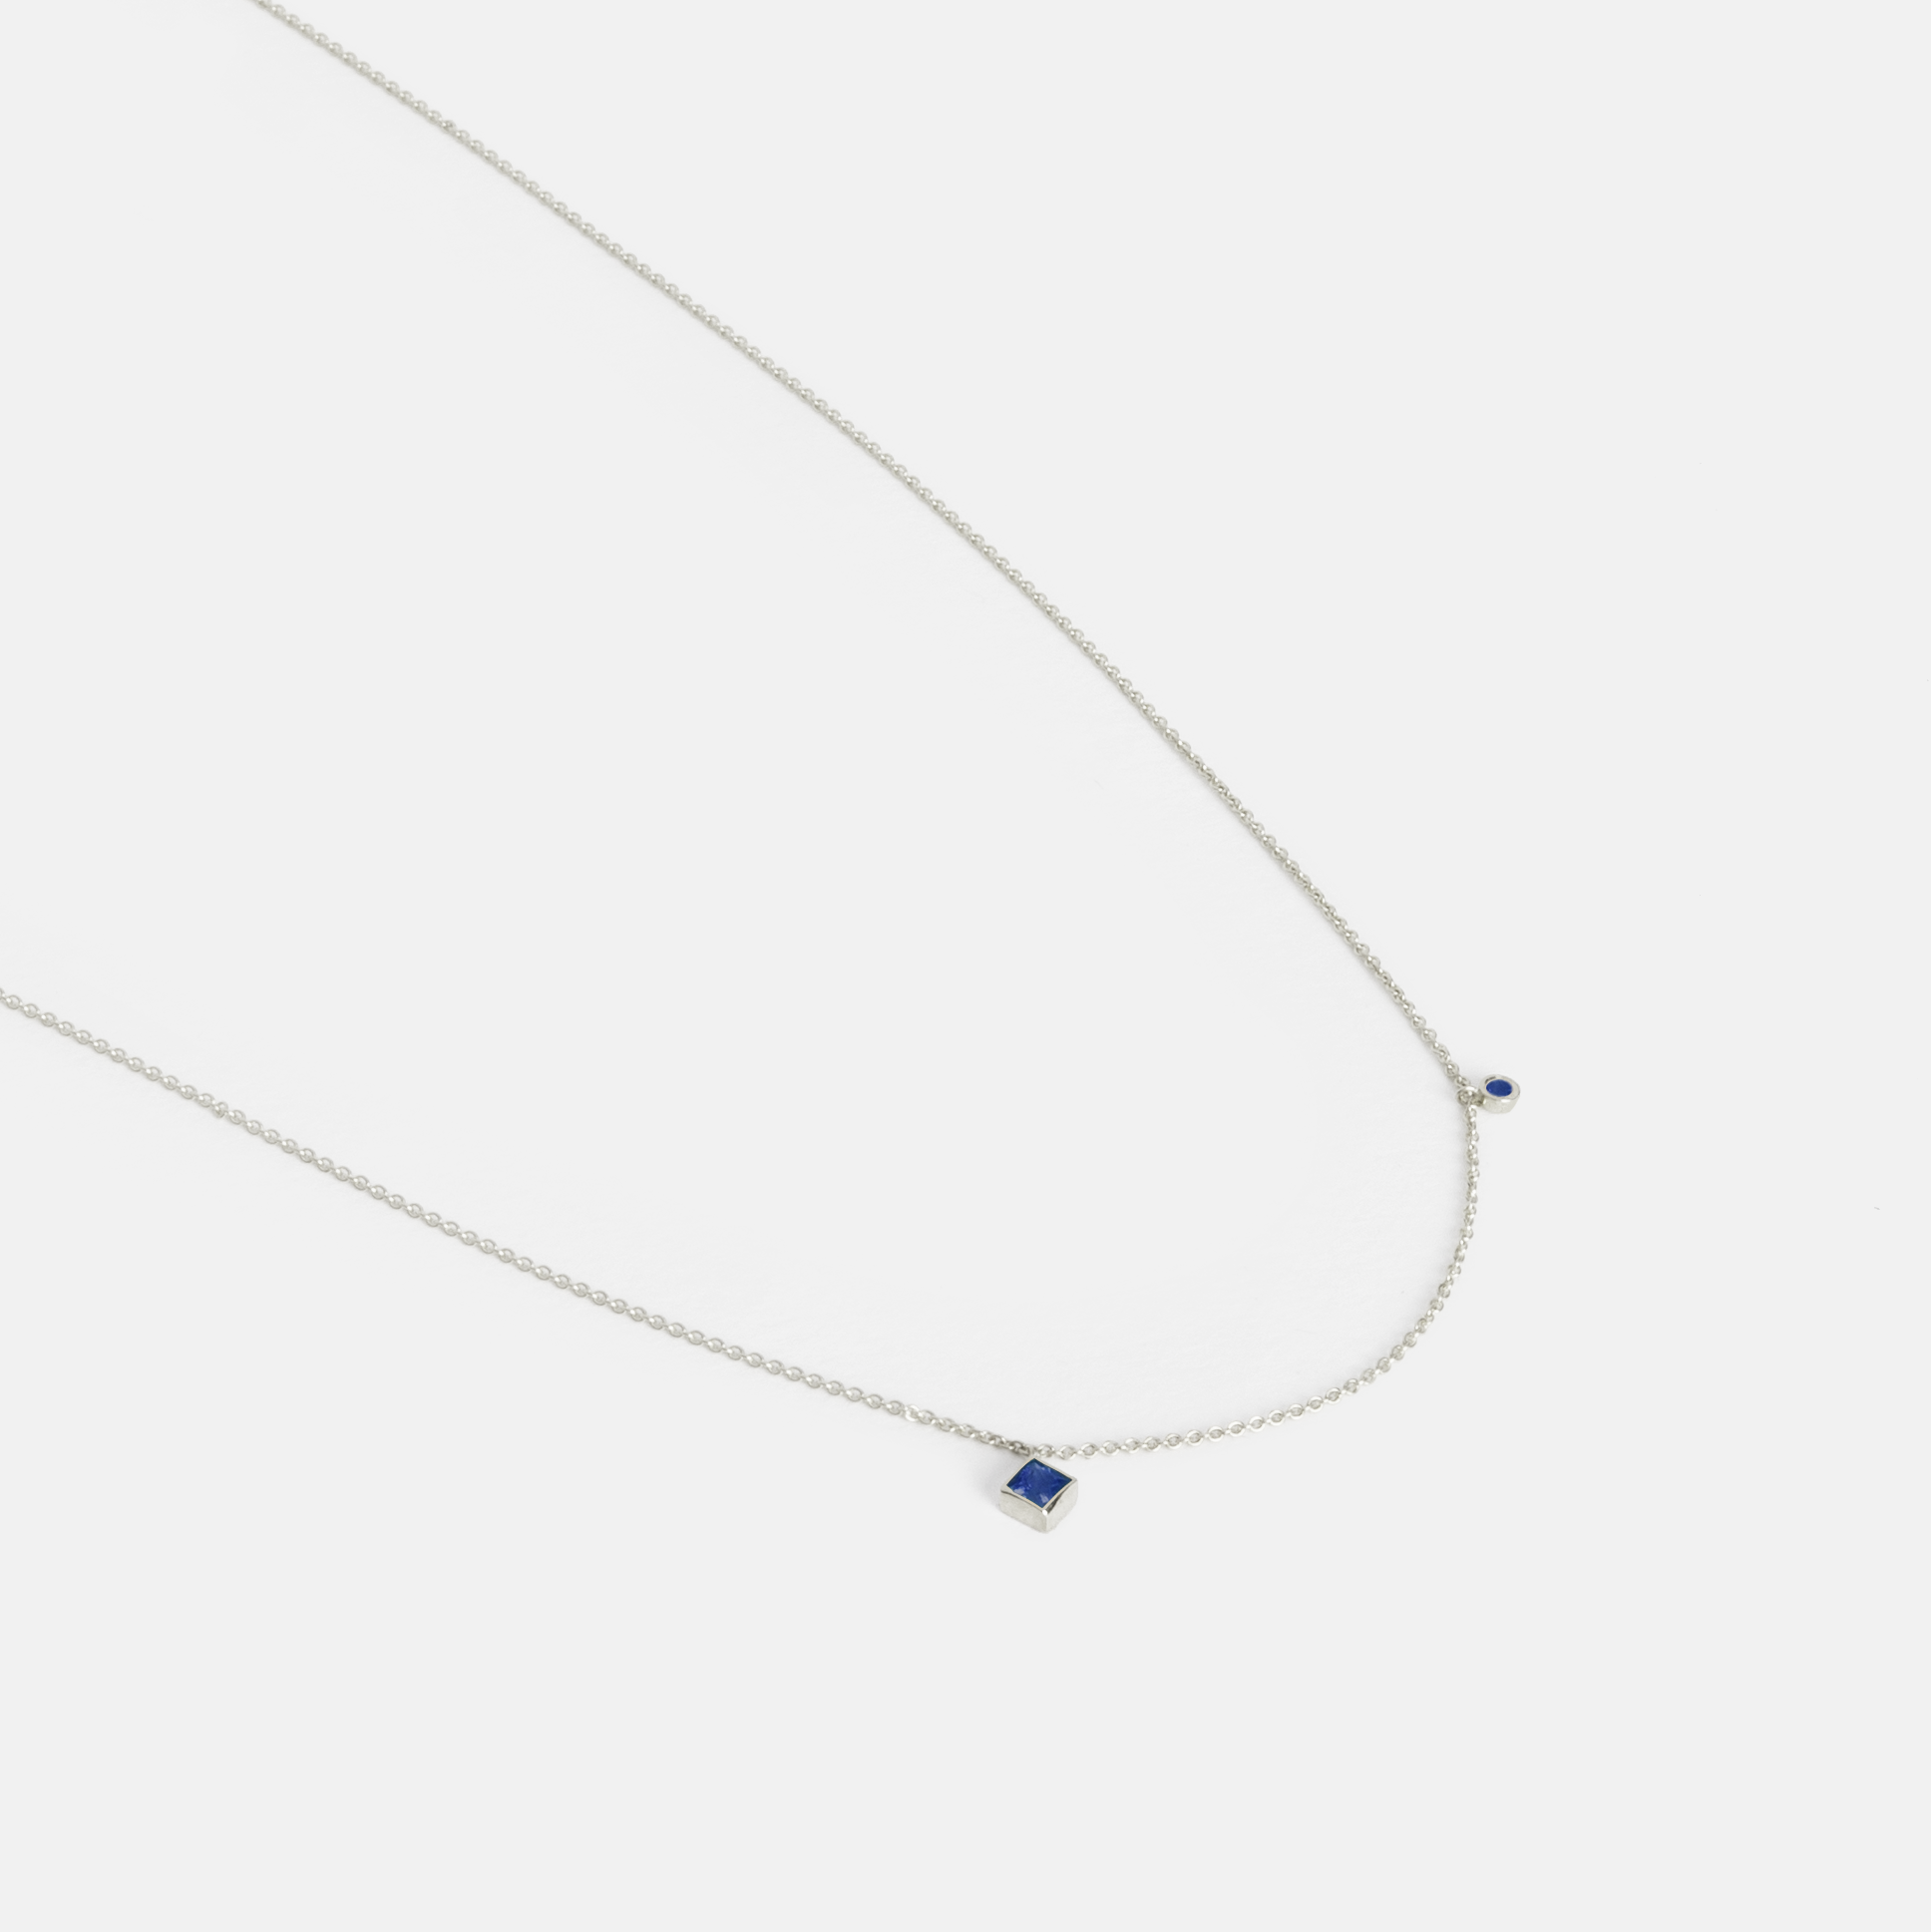  Ibi Thin Necklace in 14k White Gold set with Sapphires By SHW Fine Jewelry NYC